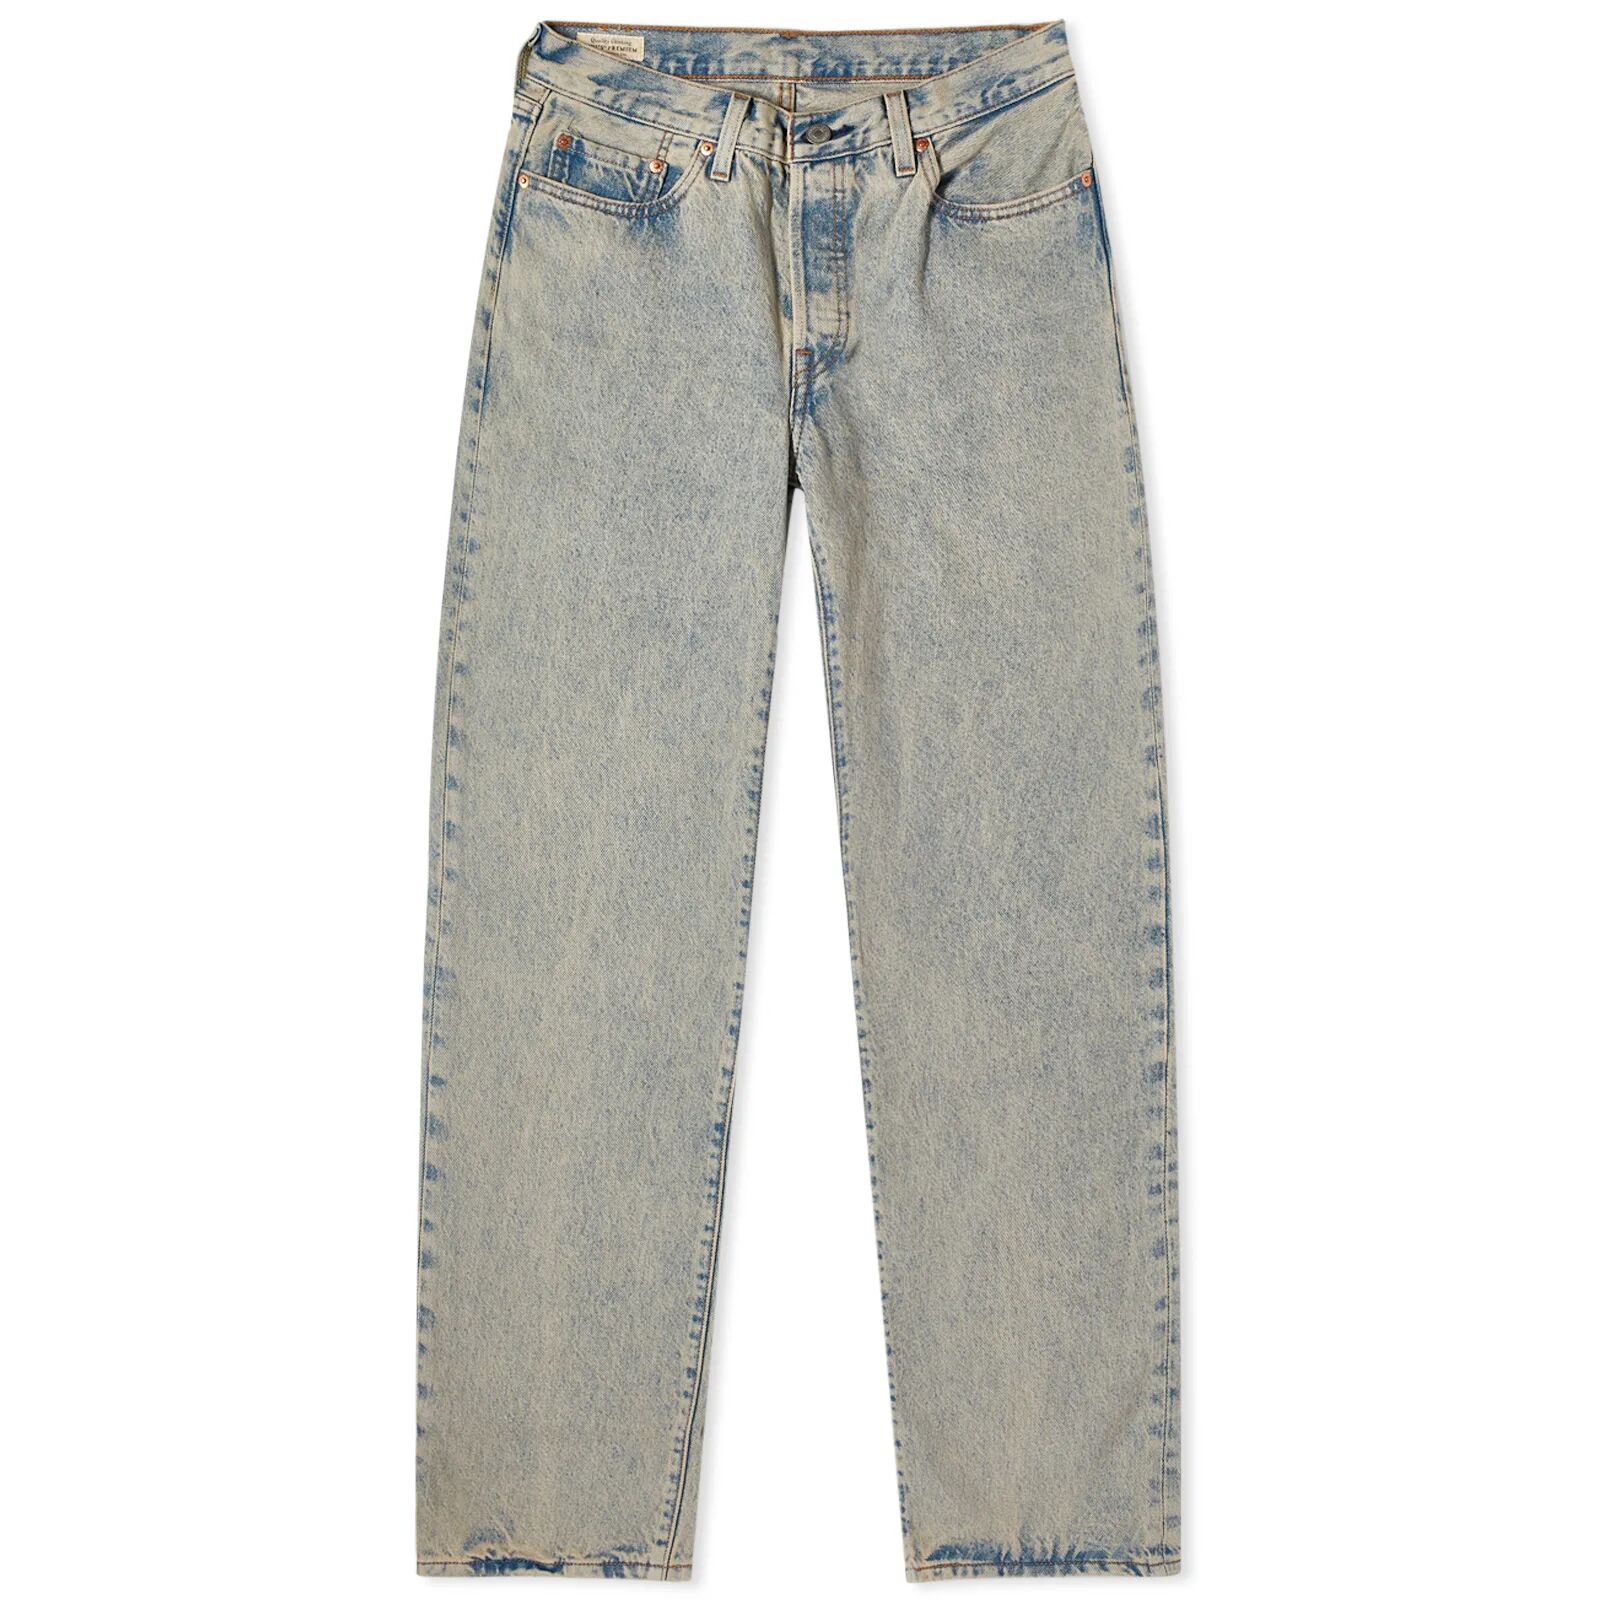 Levi’s Collections Women's Levis Vintage Clothing 501® 90s Jeans in Where'S The Tint, Size 30"